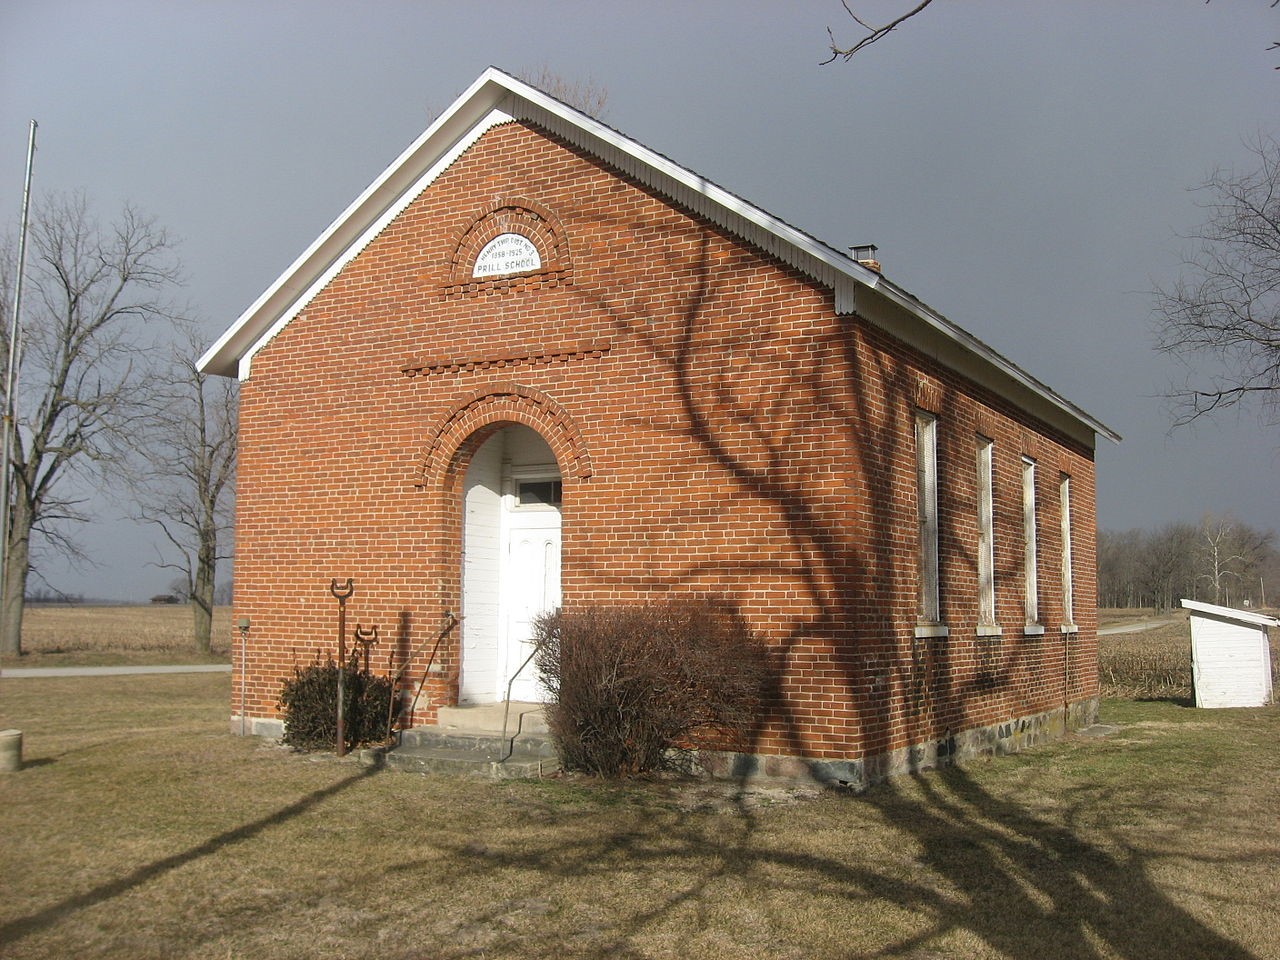 Cover Photo:  Prill School is one room school building near Henry Township close to Akron and Fulton County in Indiana. It was built in 1876 and closed in 1925. The school was restored in 1971 and opened to visitors as a museum. In 1981, the Prill School is on the National Historical Registry.